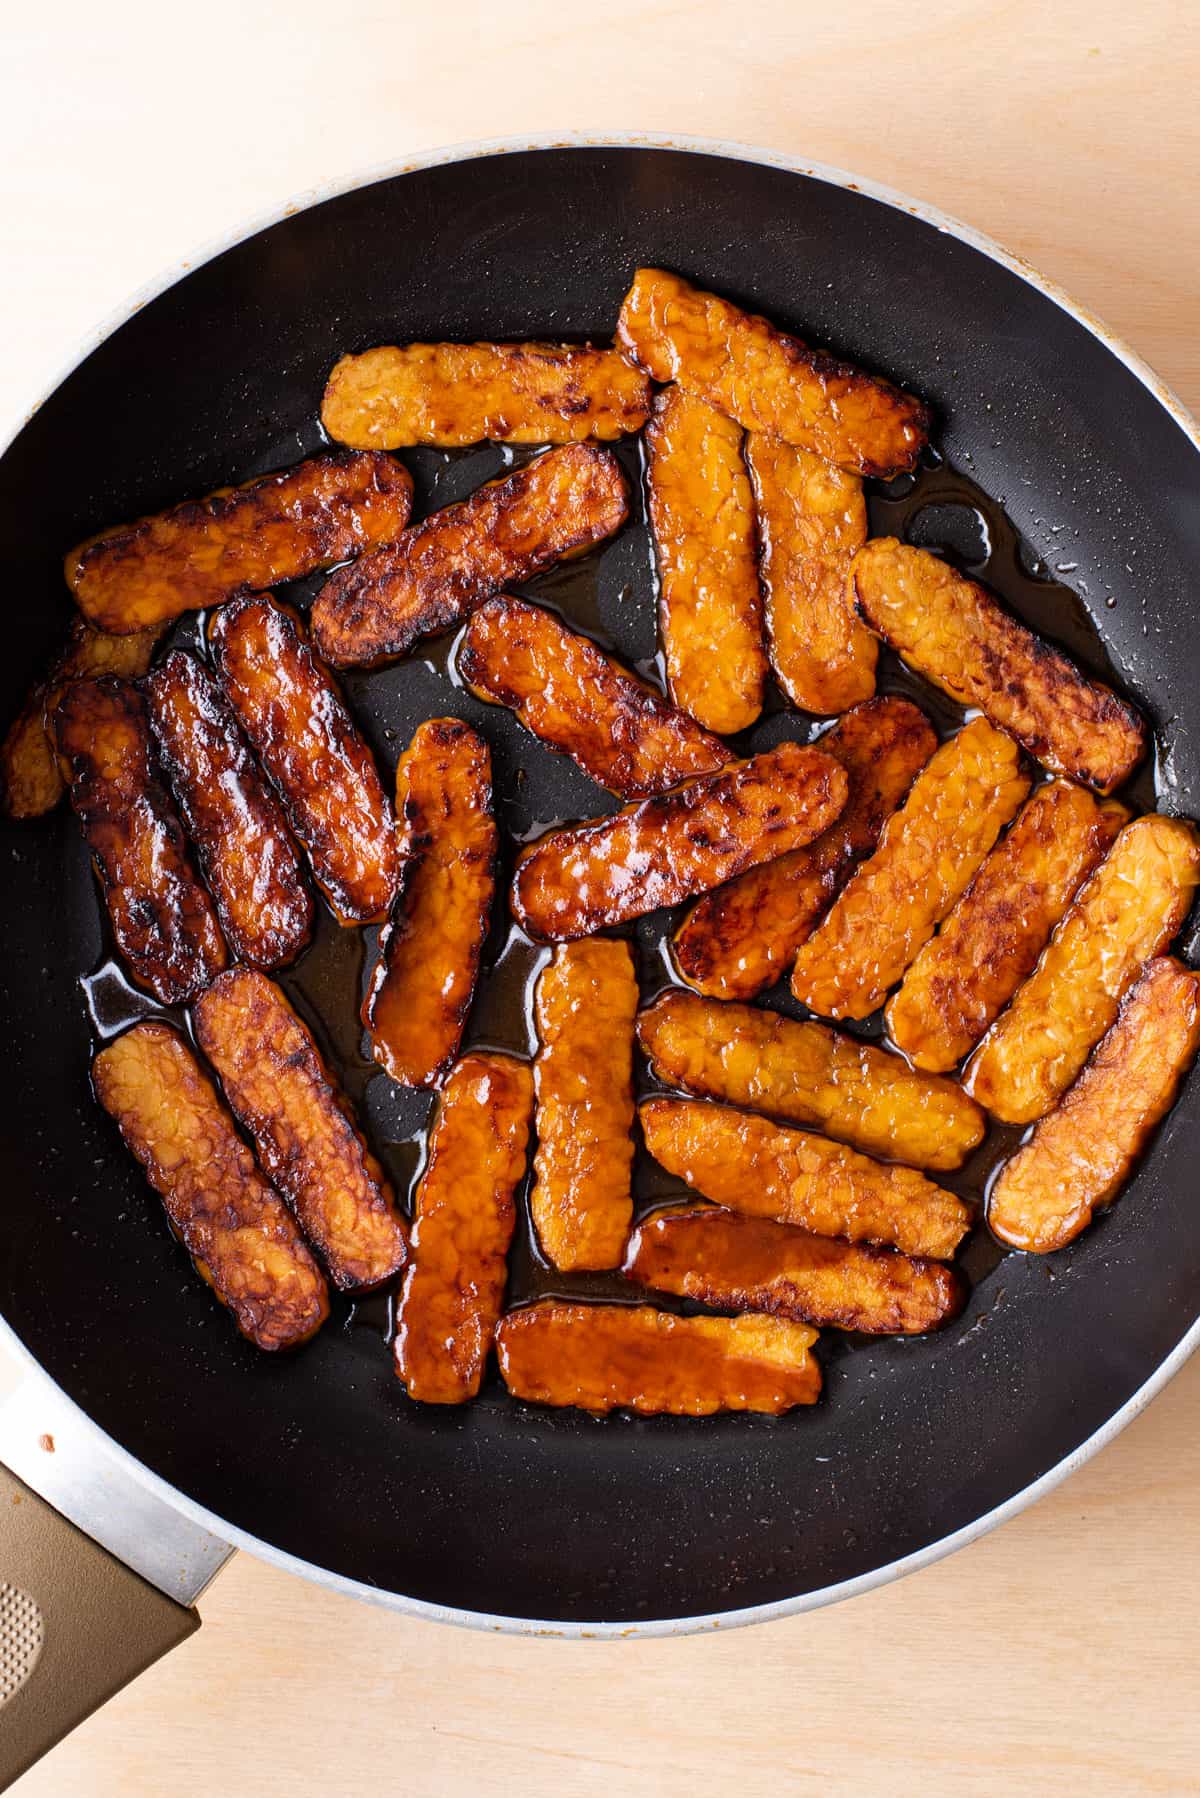 Soy-glazed tempeh slices cooking in a skillet.